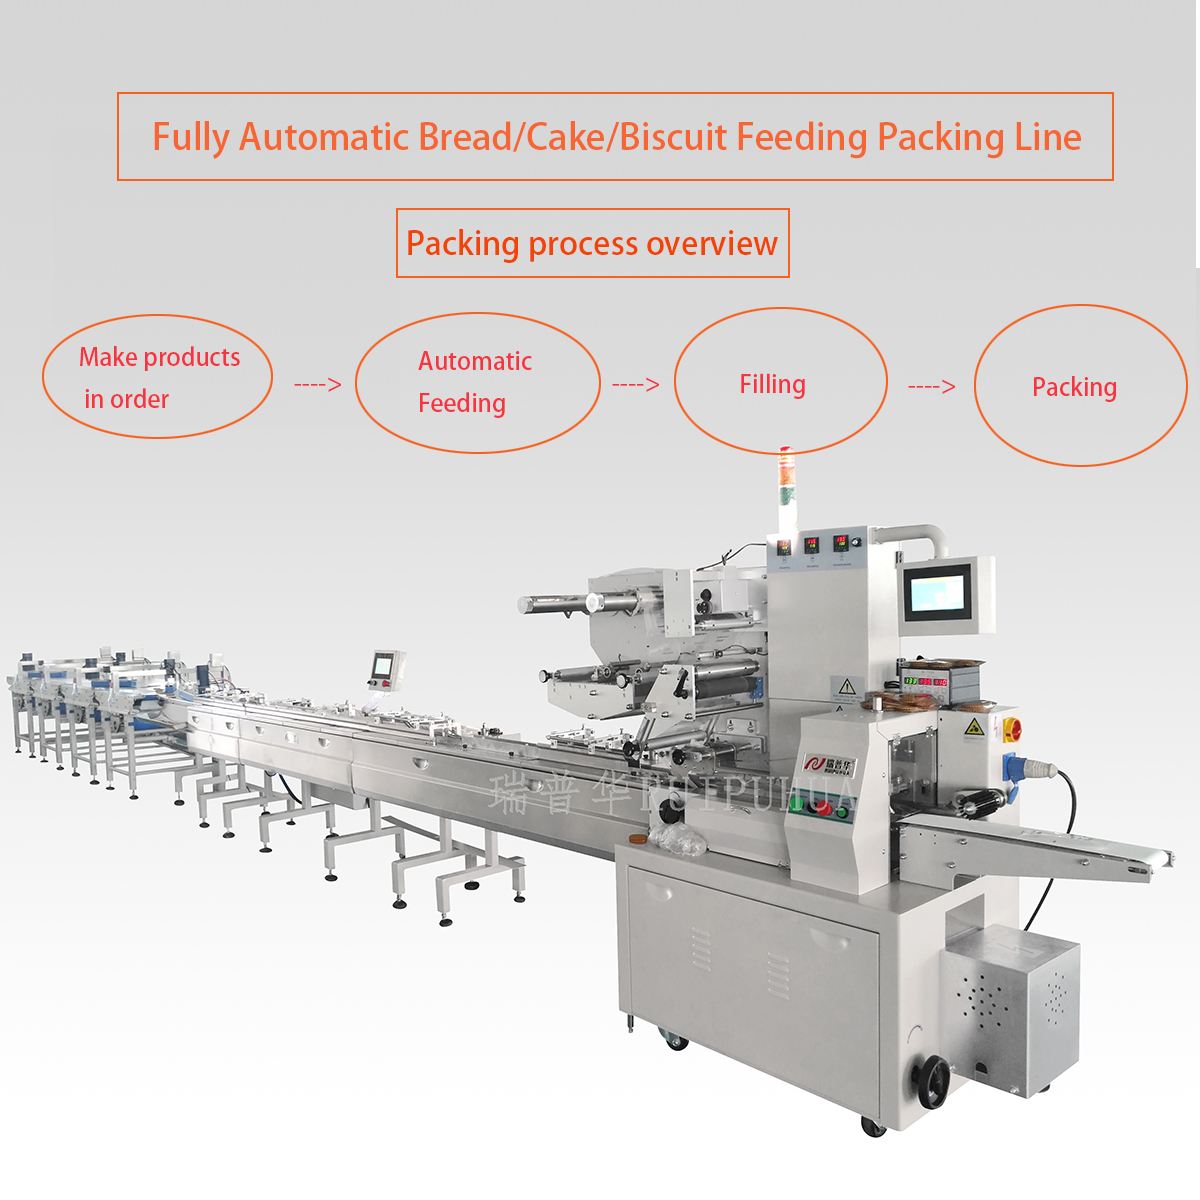 Multi-function Automatic Pillow Packing Machine For Food, Bakery, bread, cake, biscuits, snack